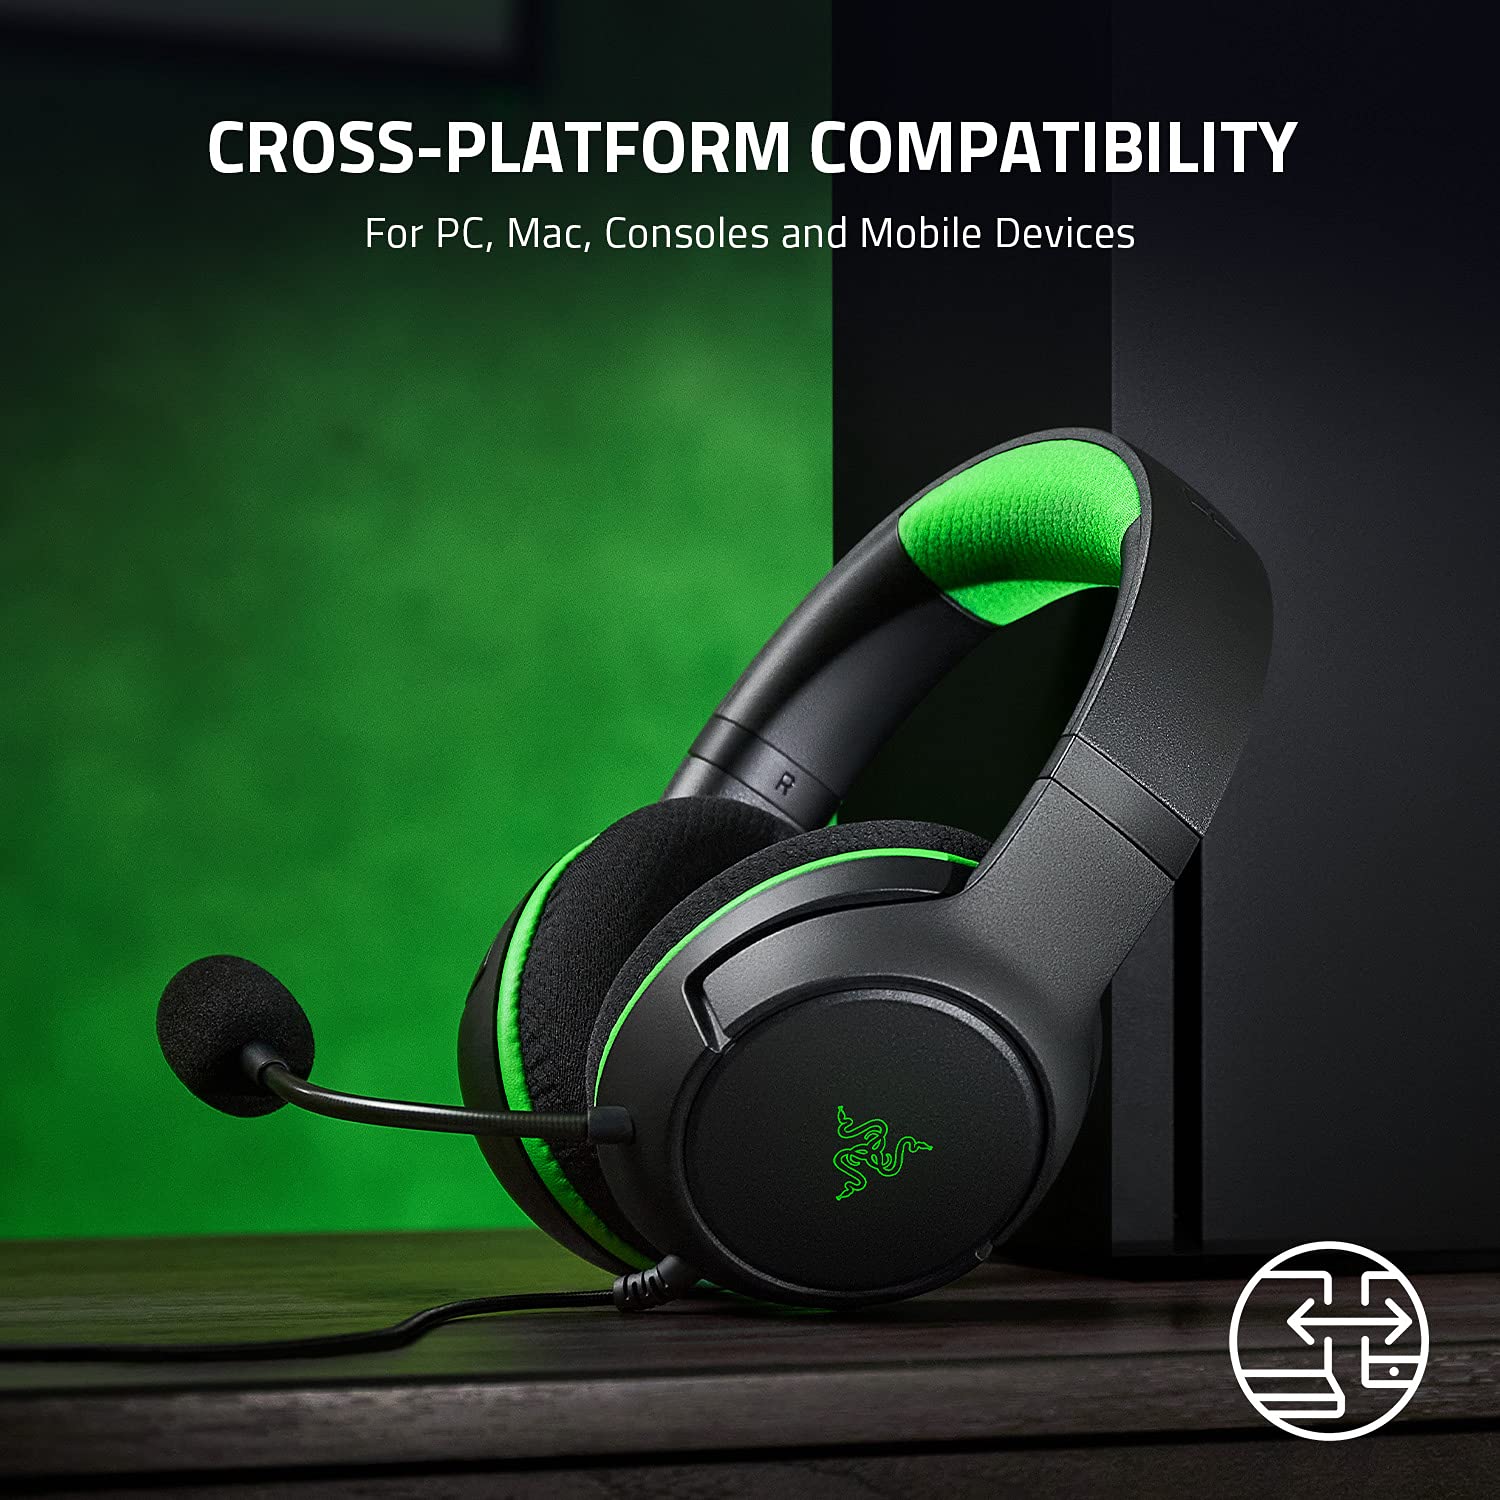 Razer Kaira X Wired Headset for Xbox Series X|S, Xbox One, PC, Mac & Mobile Devices: TriForce 50mm Drivers - HyperClear Cardioid Mic - Flowknit Memory Foam Ear Cushions - On-Headset Controls - Black